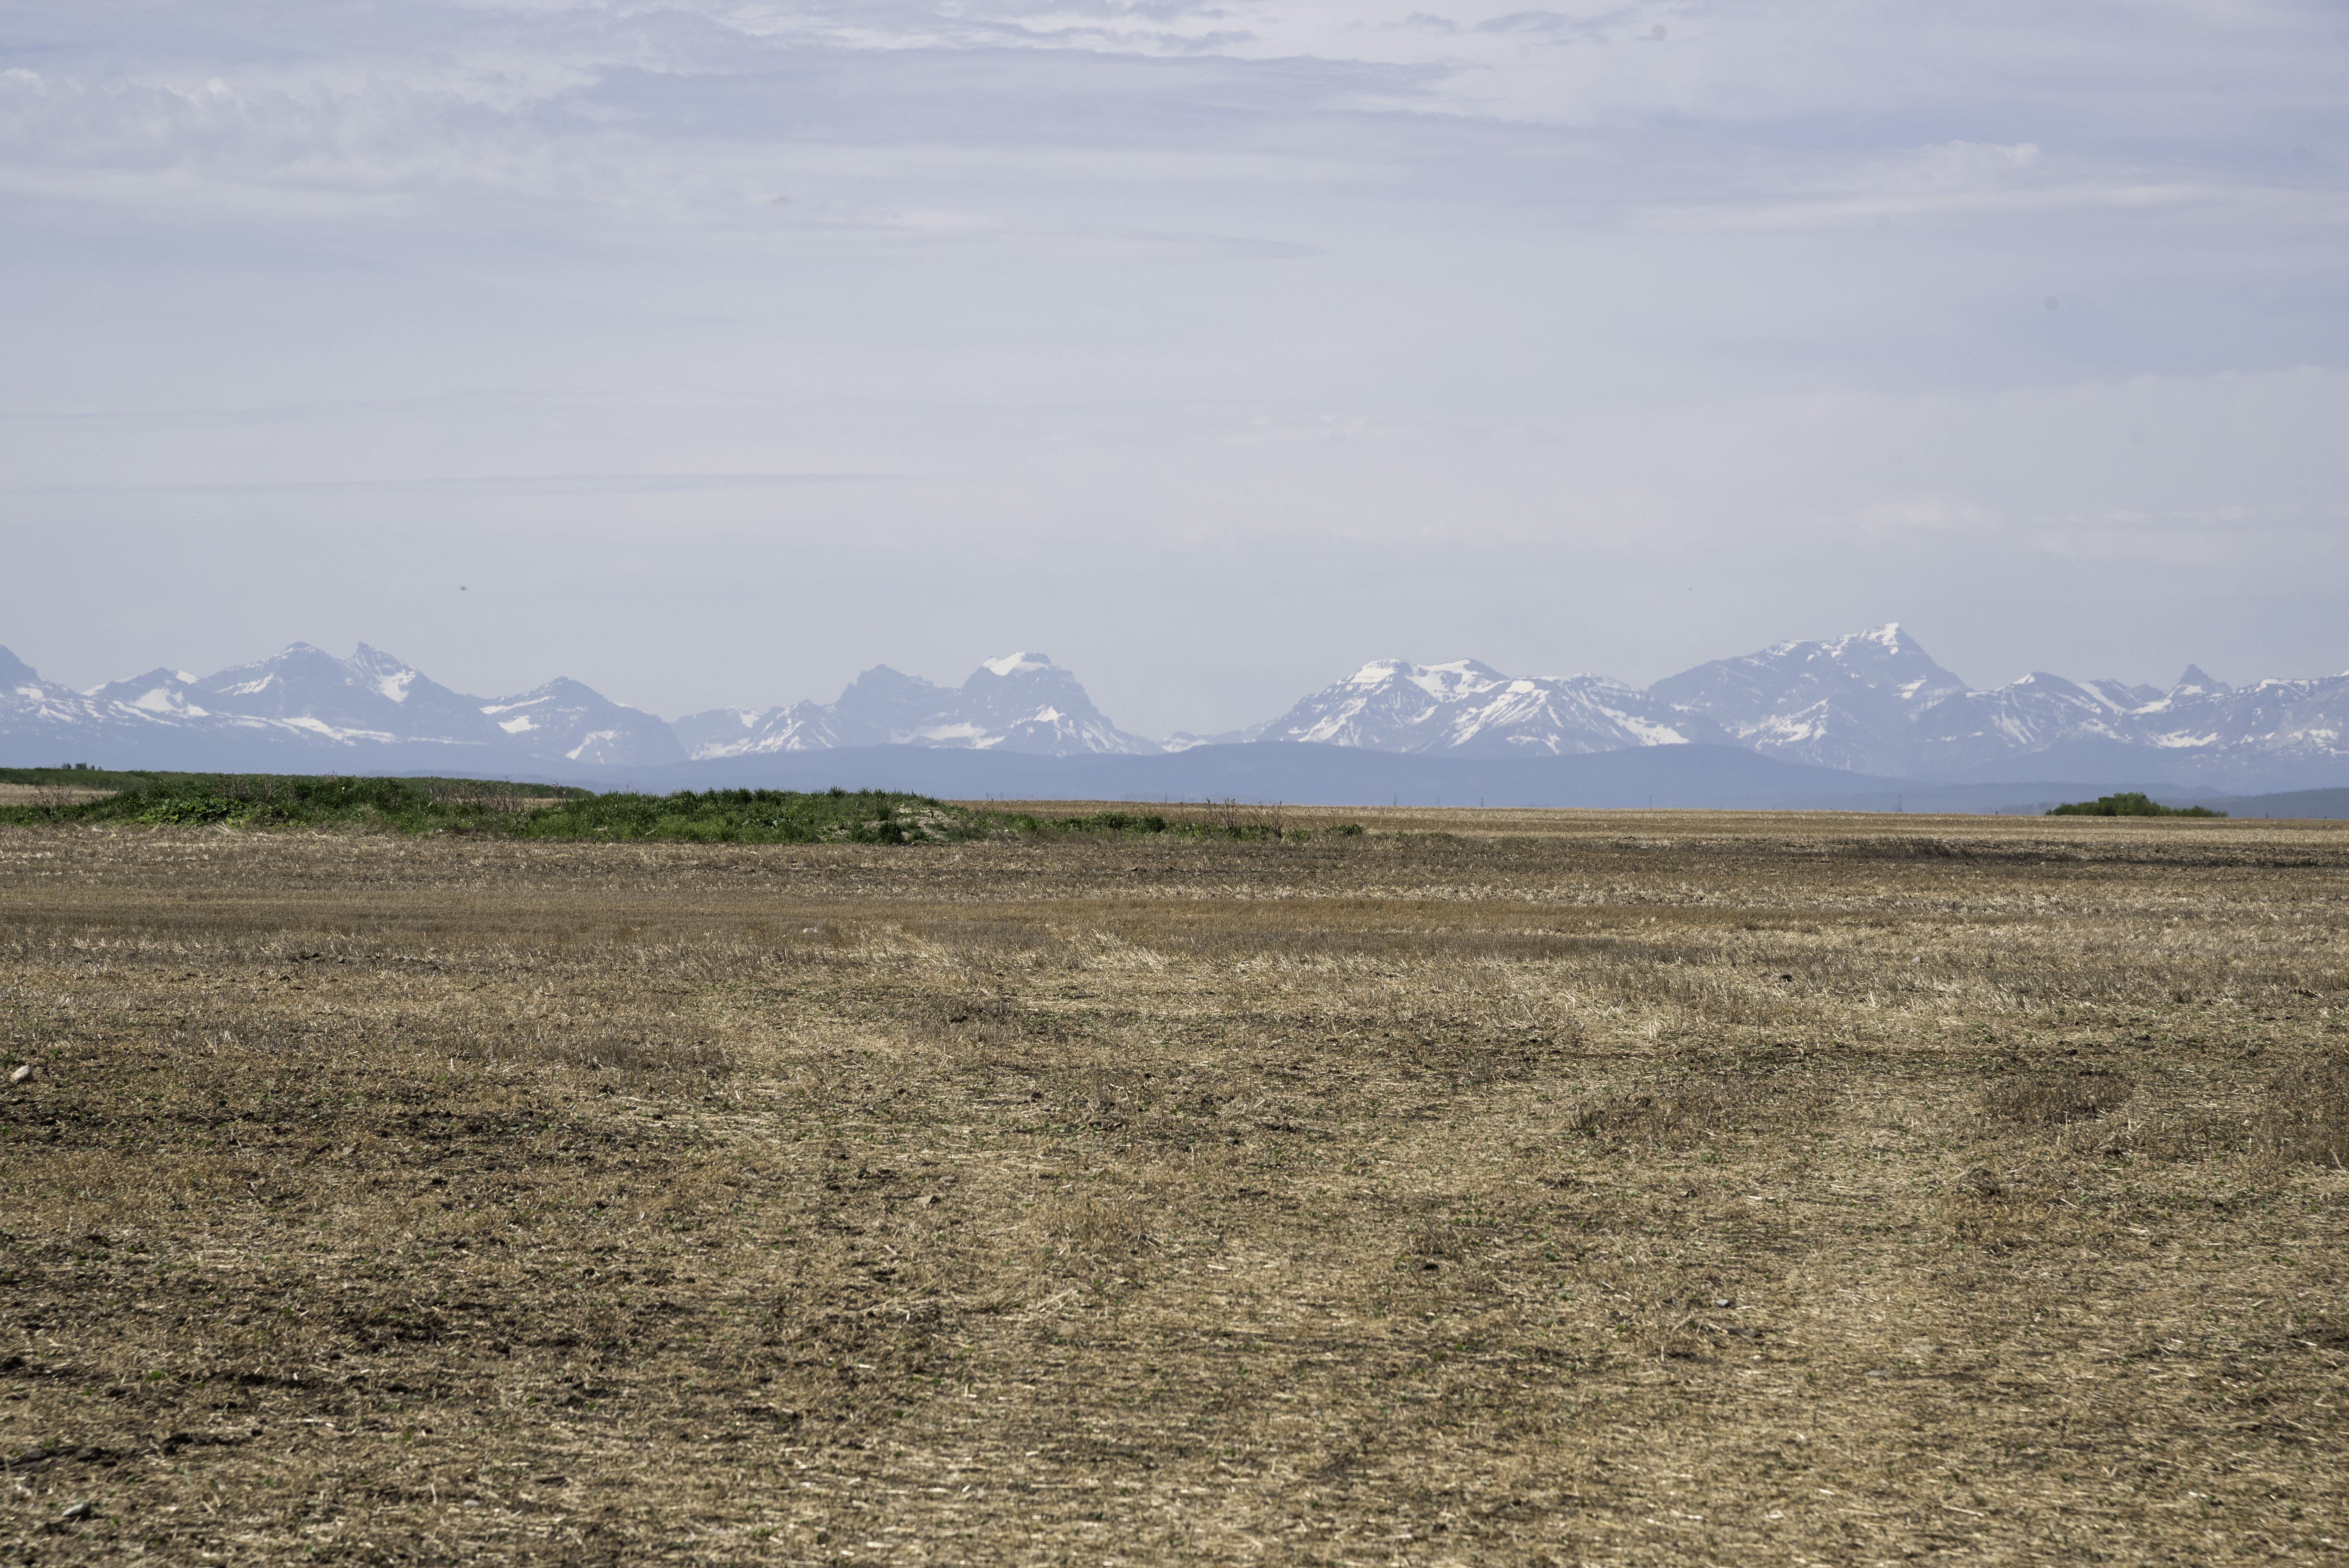 Mountains in the Distance across the field in Alberta image - Free stock photo - Public Domain ...